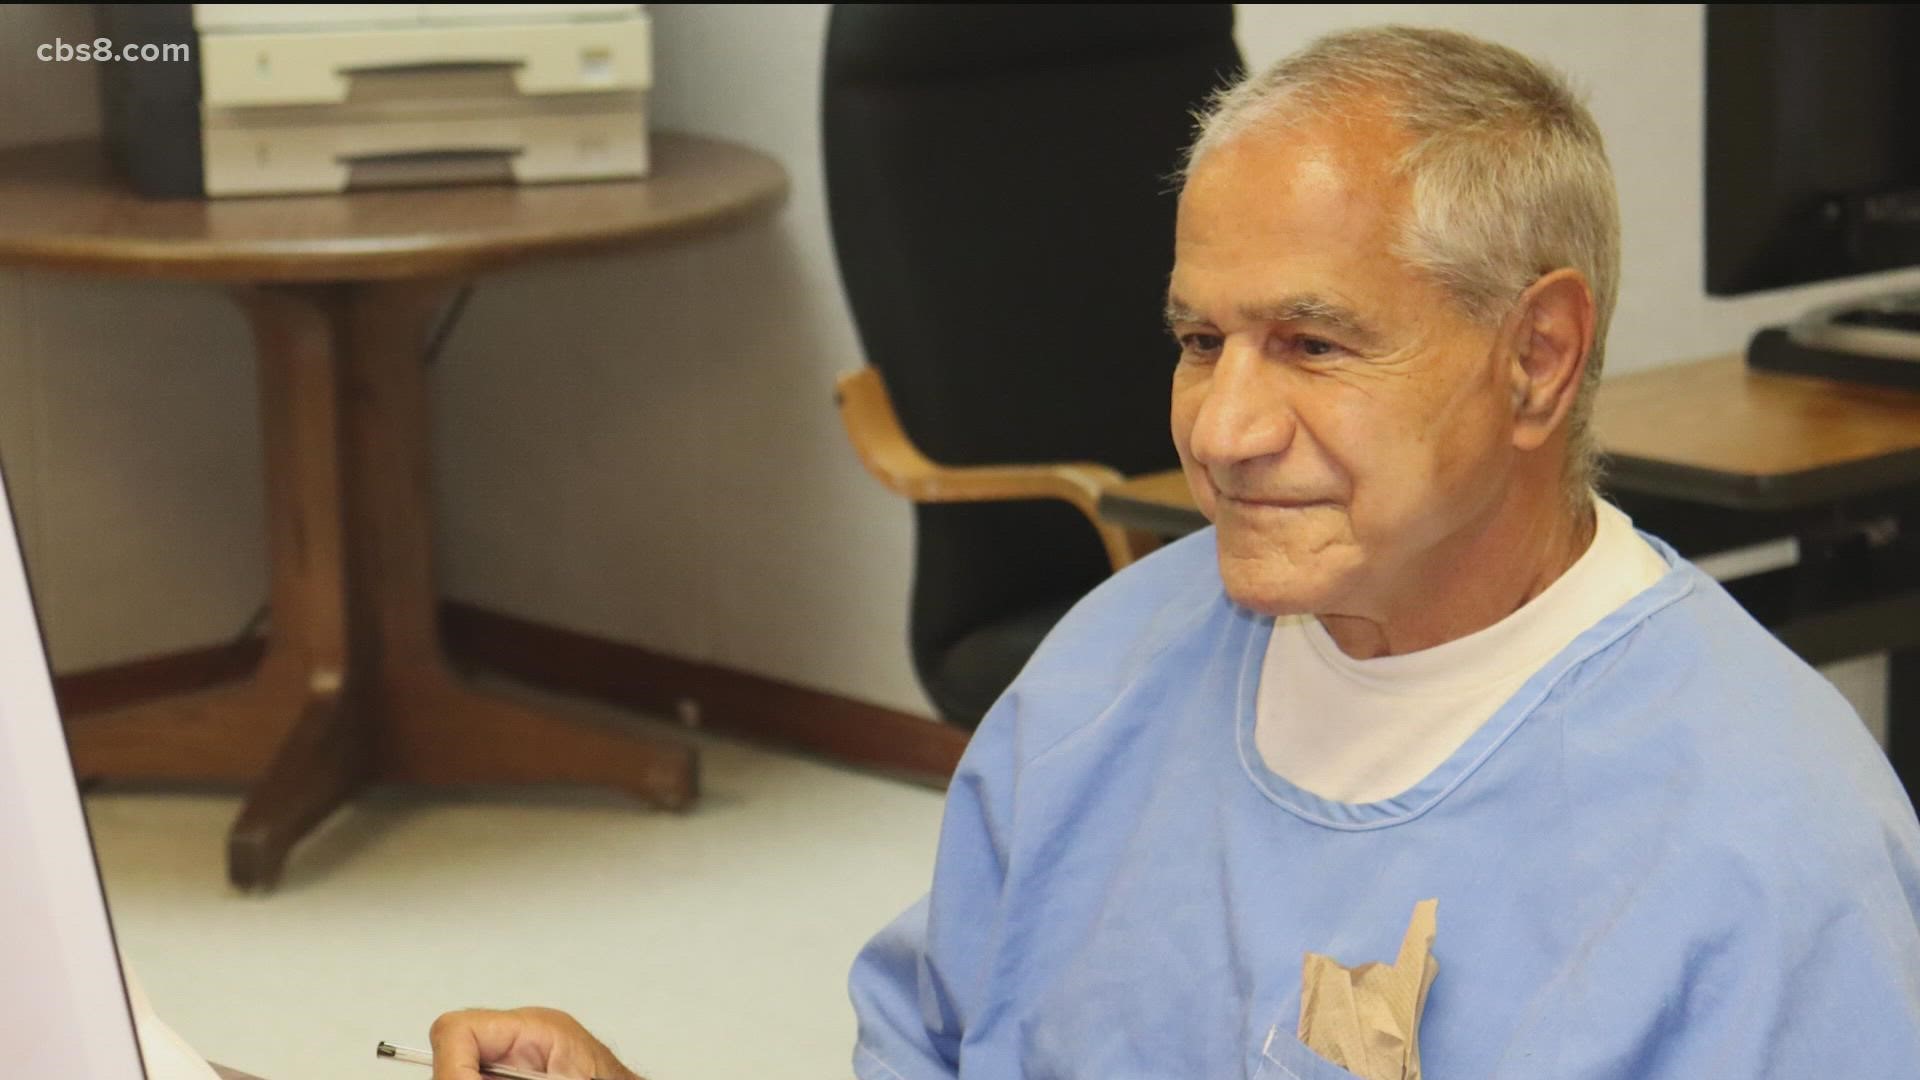 The decision does not automatically mean the 77-year-old Sirhan, who is imprisoned at the Richard J. Donovan Correctional Facility in Otay Mesa, will be released.